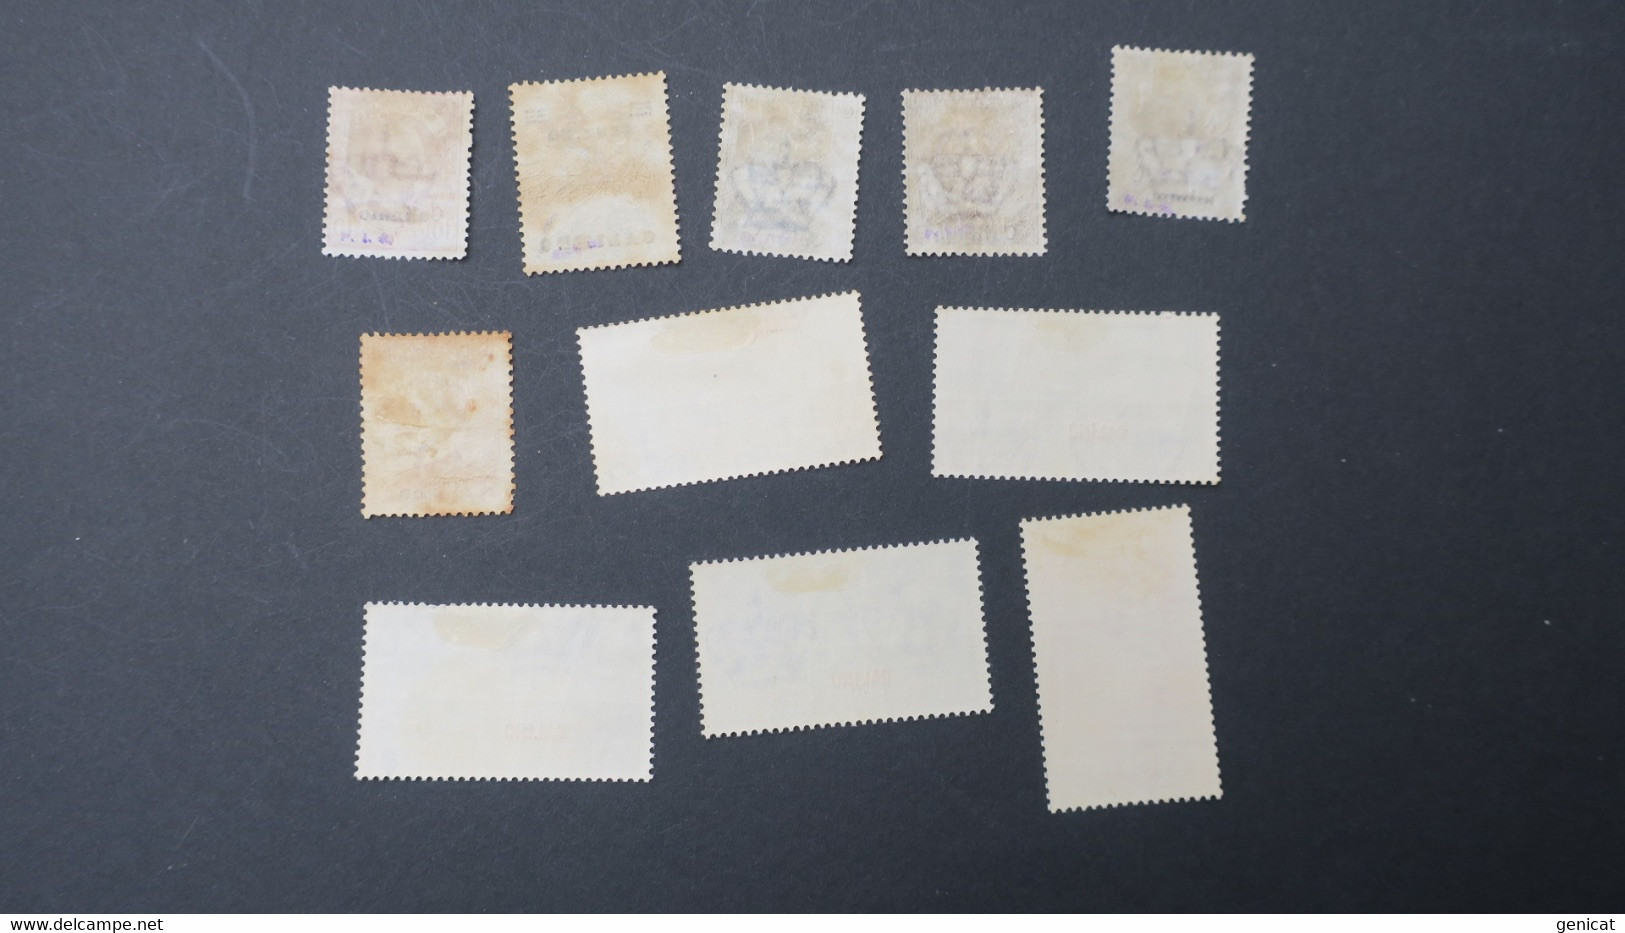 Egée Calino Colonies Italiennes Lot 11 Timbres Neuf * Voir Scans - Egeo (Calino)